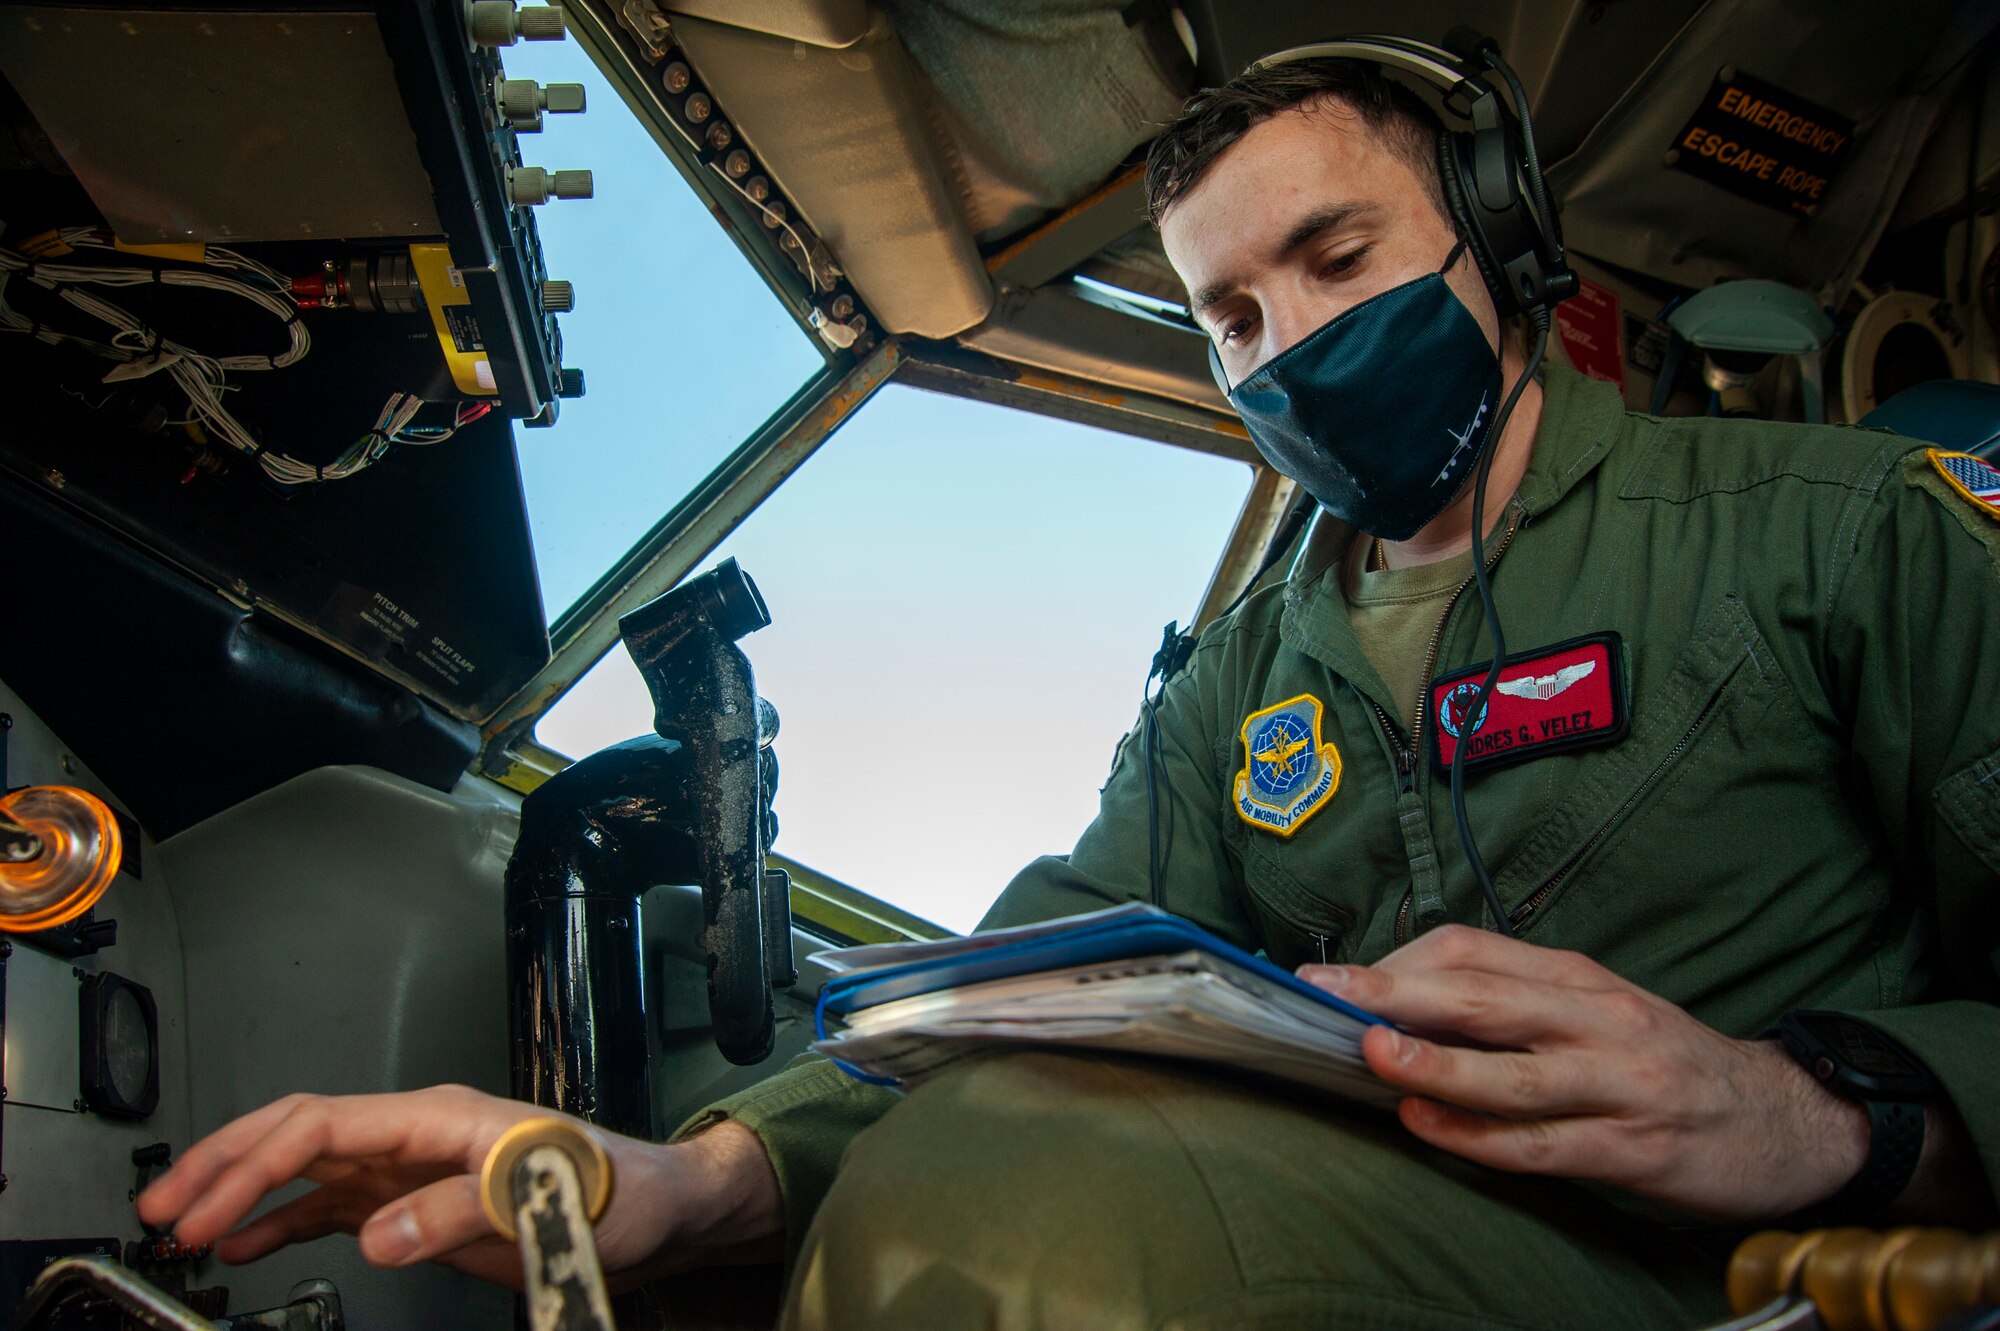 U.S. Air Force 1st Lt. Andres G. Velez, a 50th Air Refueling Squadron (ARS) pilot, reads the long format checklist binder while performing a preflight check on a KC-135 Stratotanker aircraft, at MacDill Air Force Base, Fla., April 9, 2021 prior to a 91st ARS deployment. 
Airmen from the 50th ARS completed pre-deployment measures for deploying 91st ARS Airmen to help reduce the burden of certain preparations before the 91st flew to their deployed location. (U.S. Air Force photo by Airman 1st Class David D. McLoney)